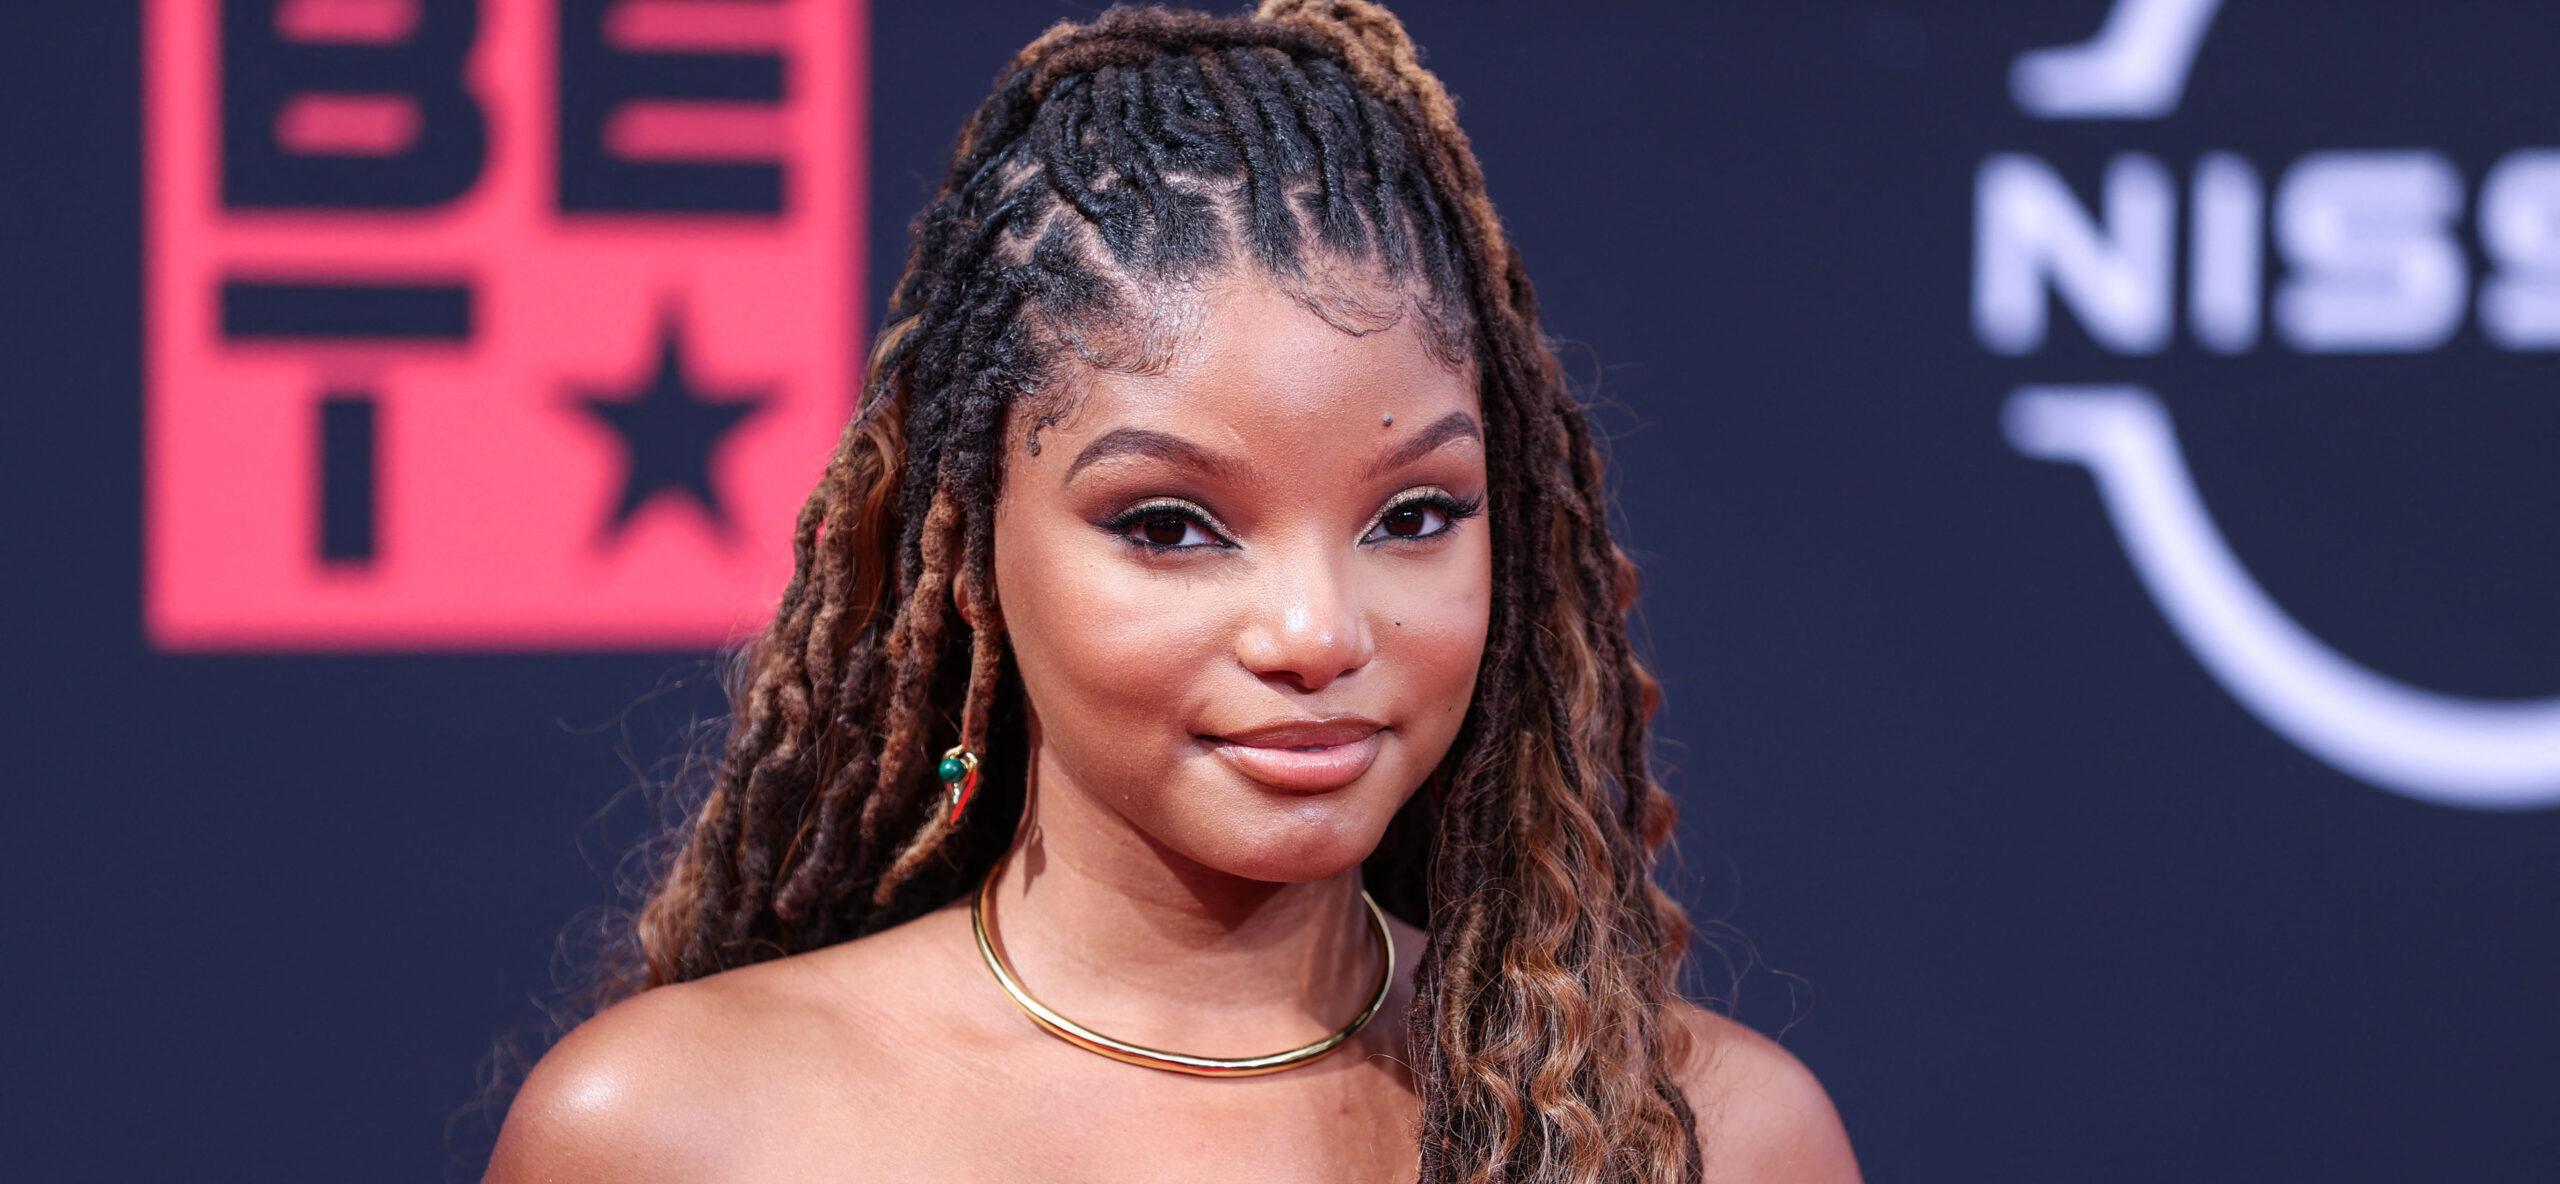 Halle Bailey Flaunts Postpartum Physique With Refreshing Fitness Goals